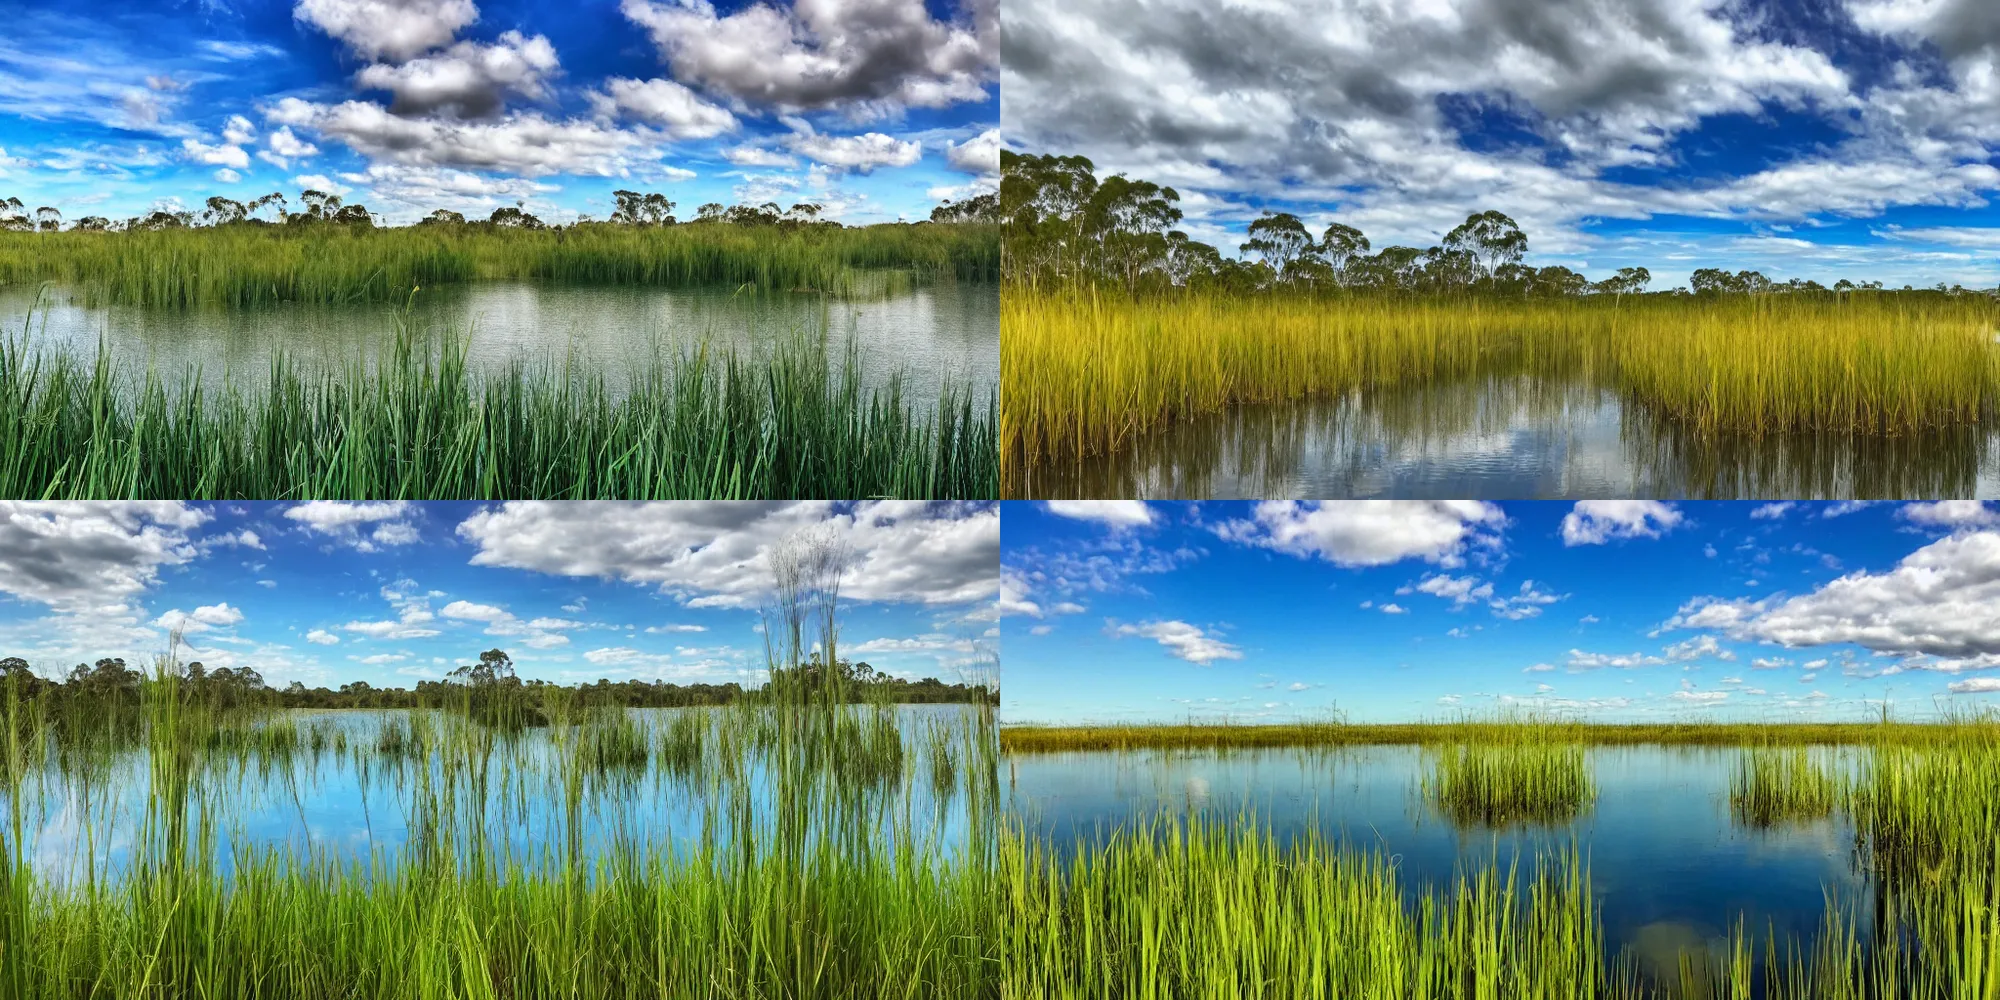 Prompt: Beautiful still lake surrounded by reeds, australia, trees in background, lime colored plants in foreground, blue sky with clouds, photography, 4k, wallpaper, hdr, ultra wide camera, shot on iphone, barely visible viewing platform in foreground